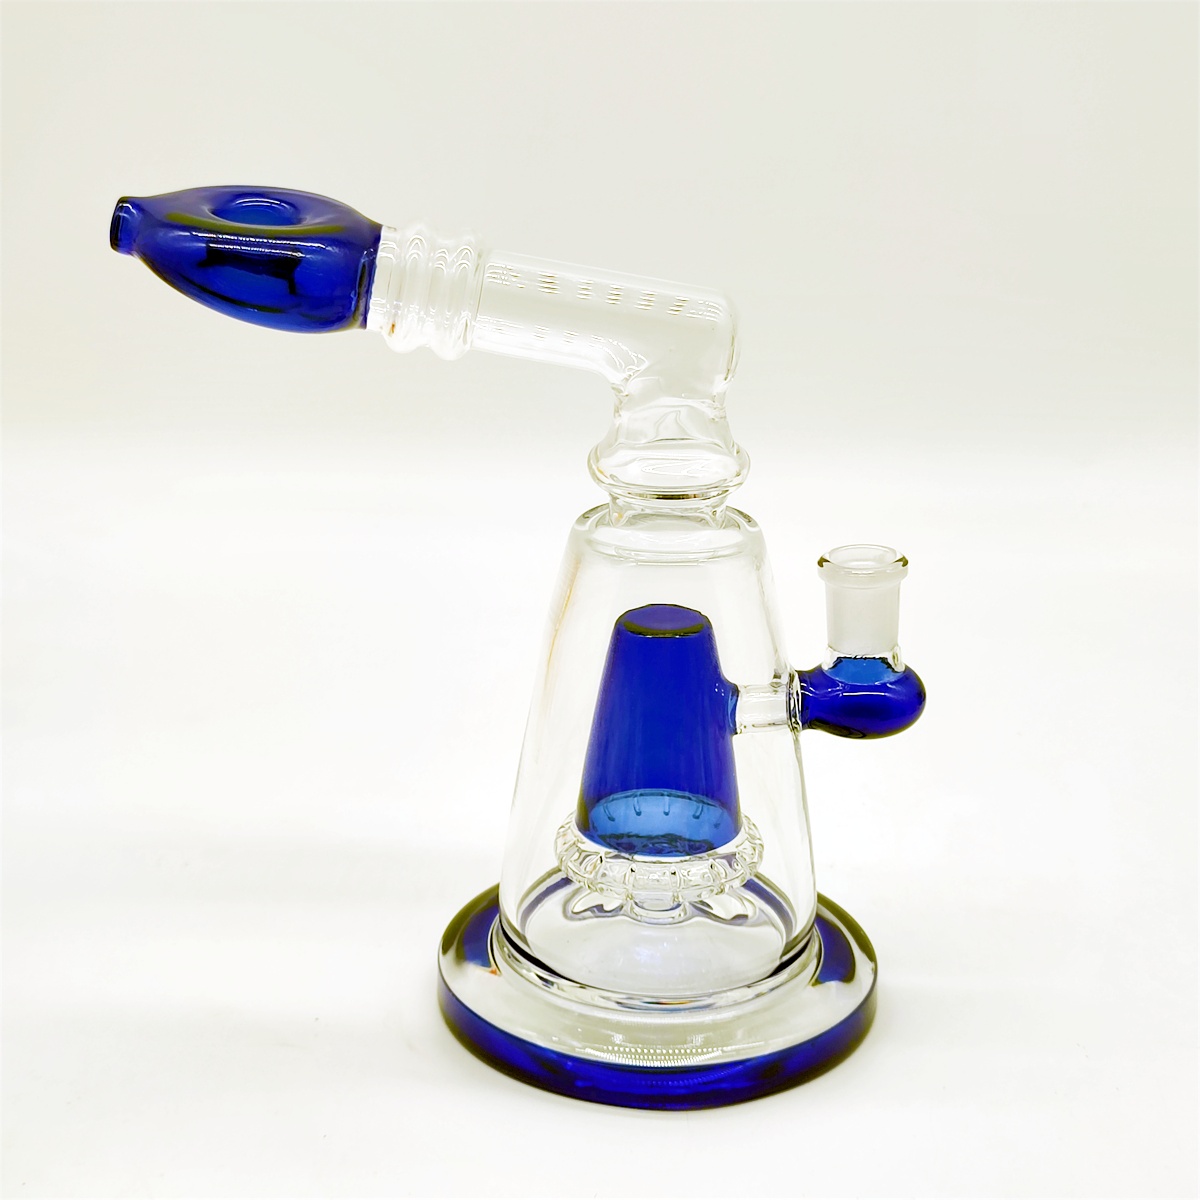 8 to 9 Inch Large Scale Clear Teal Fab Egg Multi Color Hookah Glass Bong Dabber Rig Recycler Pipes Water Bongs Smoke Pipe 14mm Female Joint US Warehouse